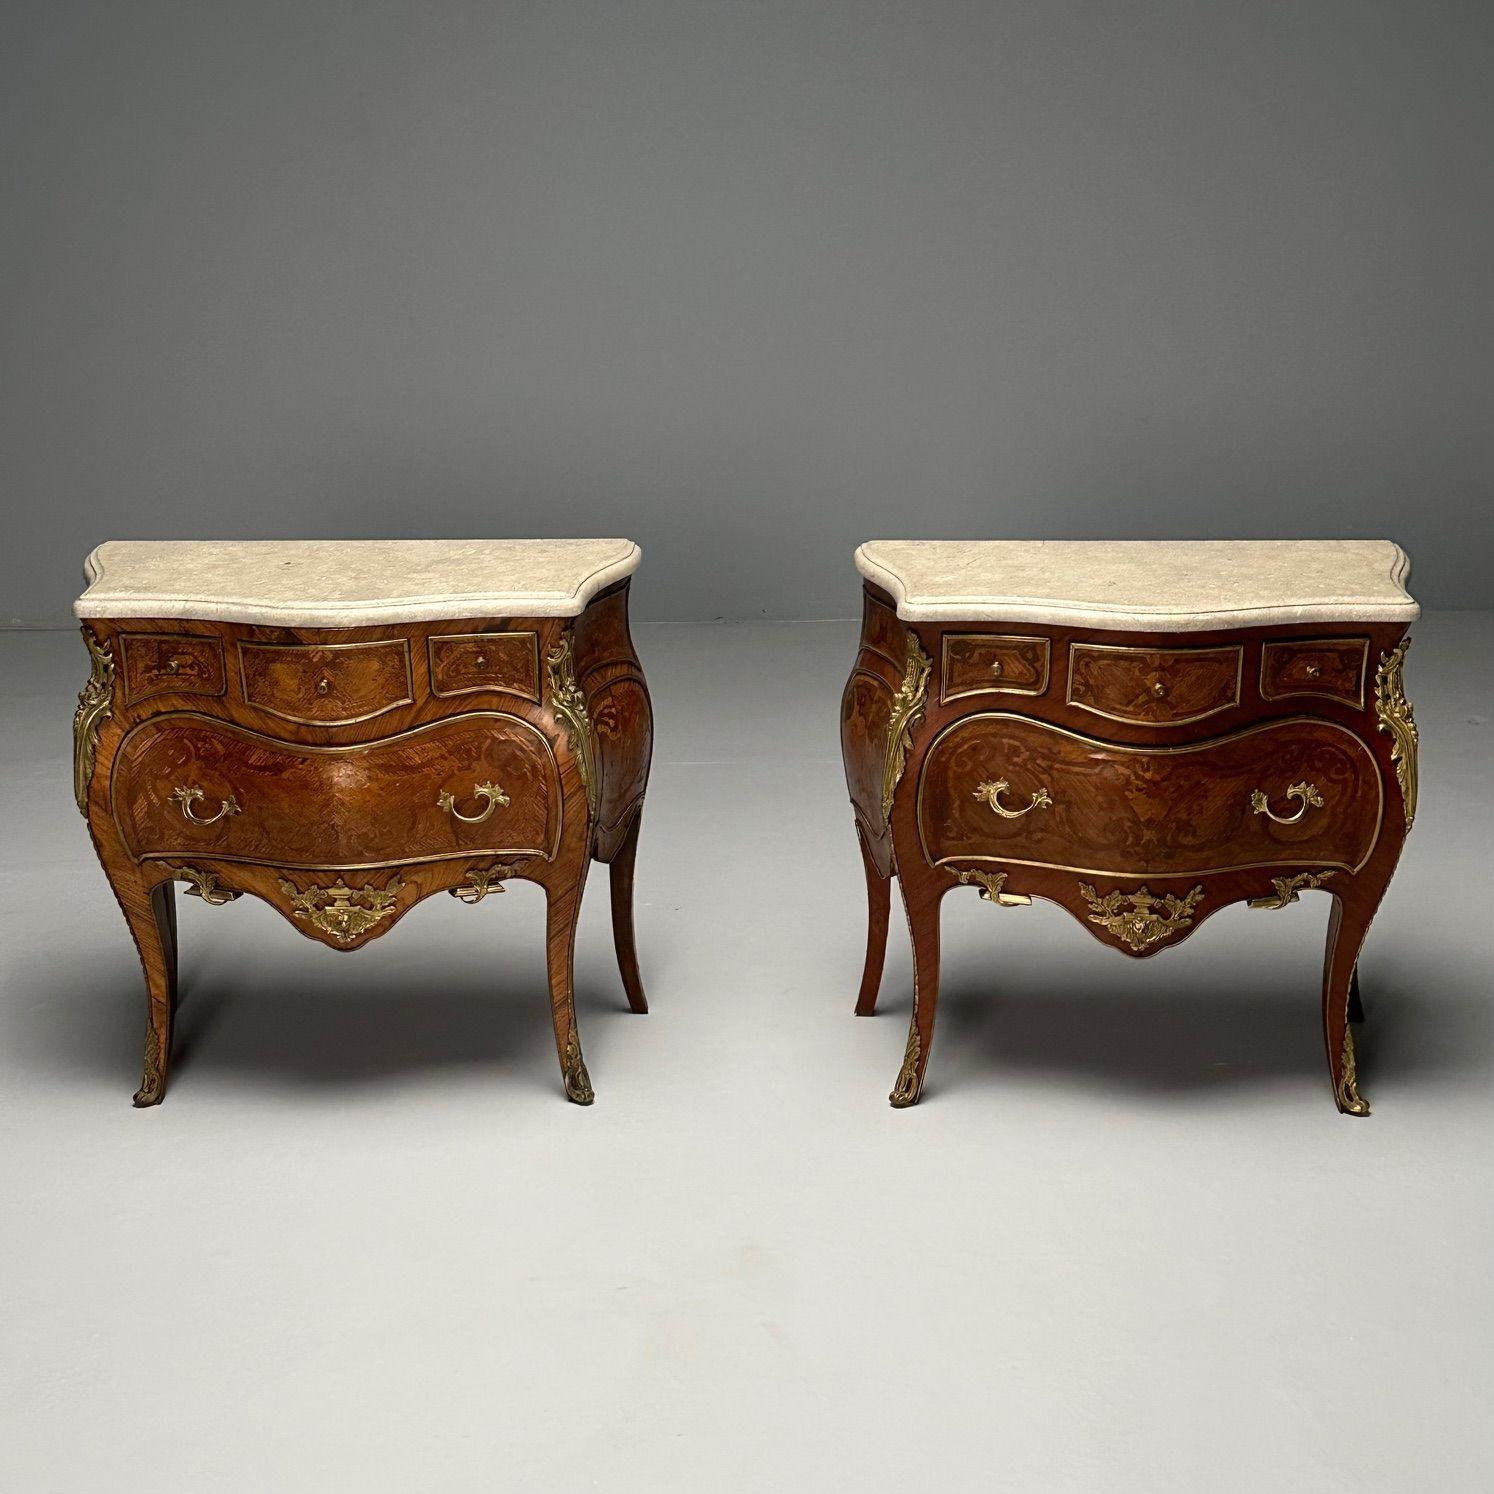 Louis XV, Small French Commodes or Nightstands, Marquetry, Marble, France, 1970s

Pair of Bombe Chests or nightstands having bronze mounts with two drawers on inlaid fronts and sides. The pair supporting marble tops.

Marquetry, Marble
France, c.